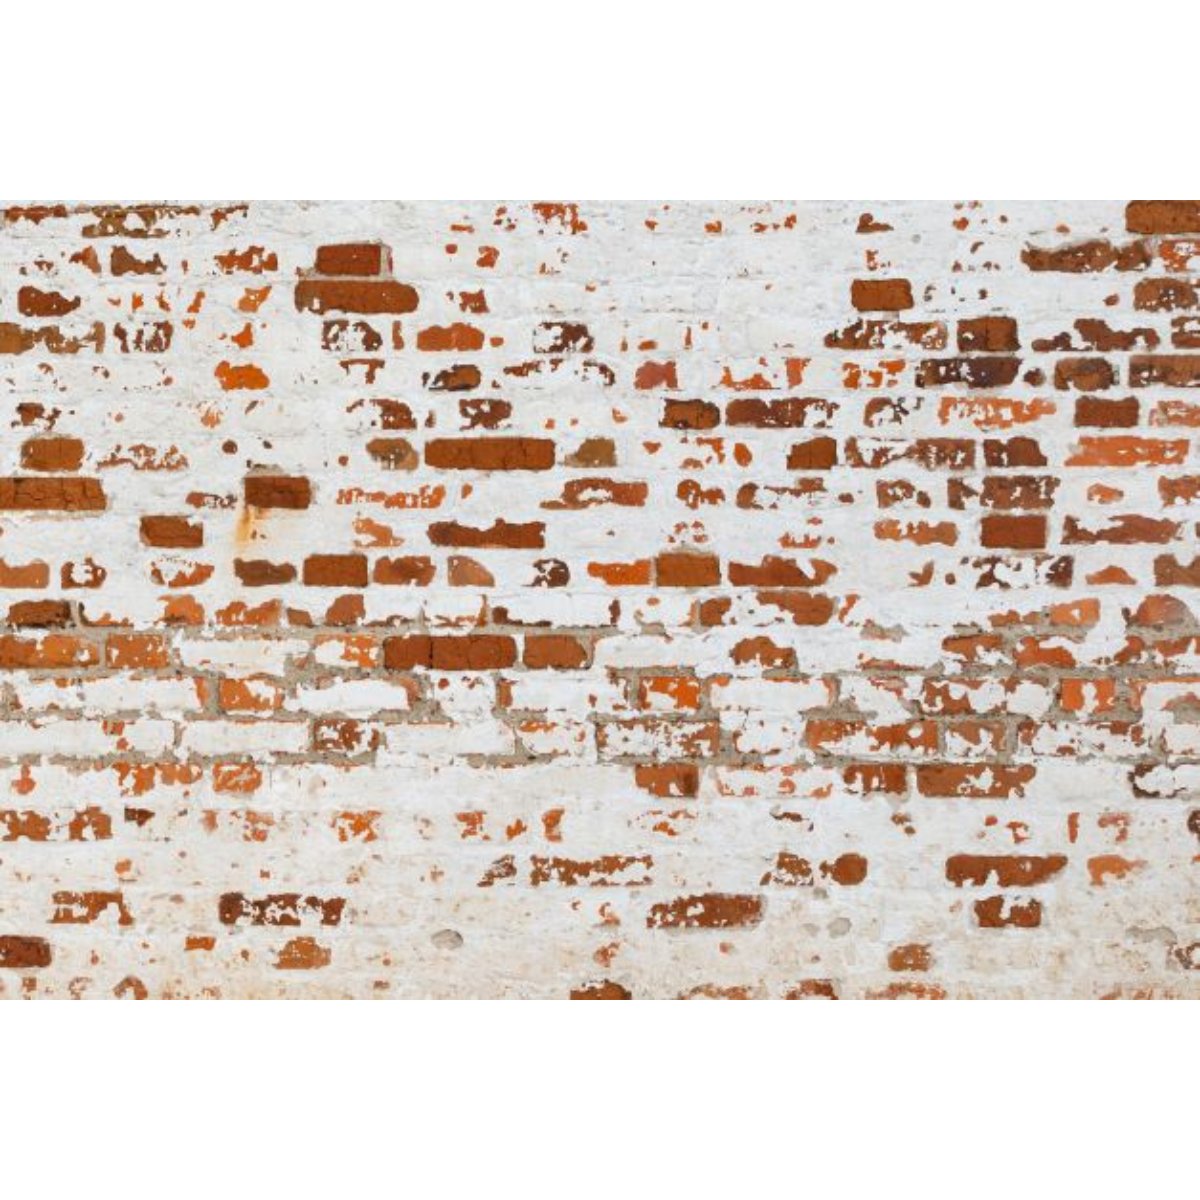 Roycycled Treasures - Schmered Brick Decoupage Paper - 20x30in - Rustic River Home